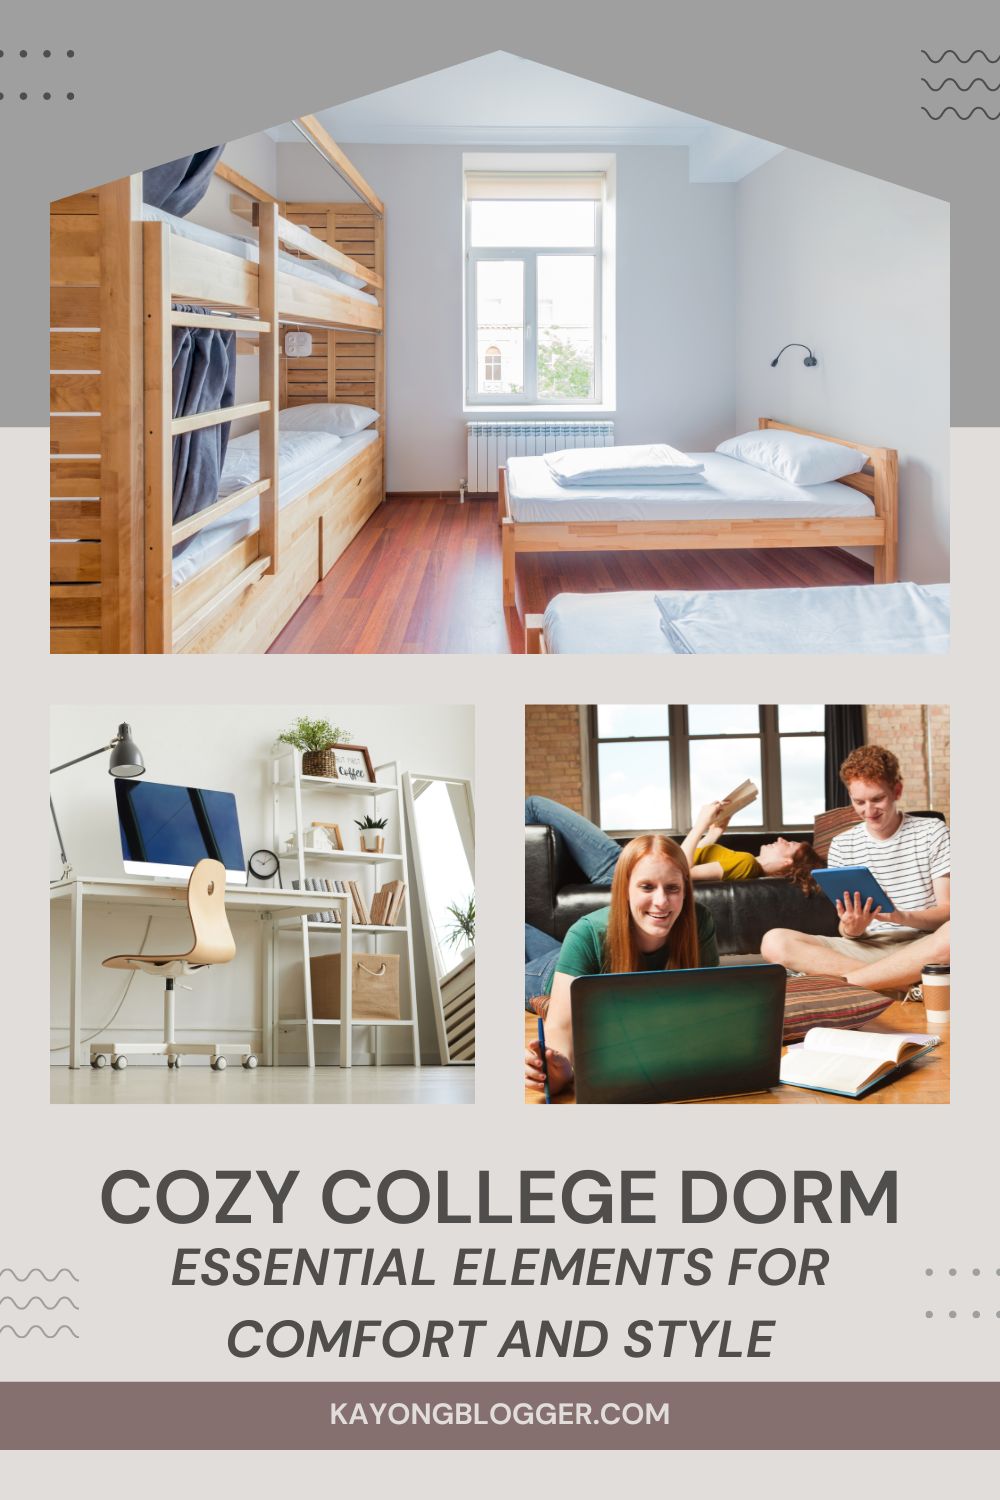 Cozy College Dorm: Creating a Comfortable Living Space on Campus